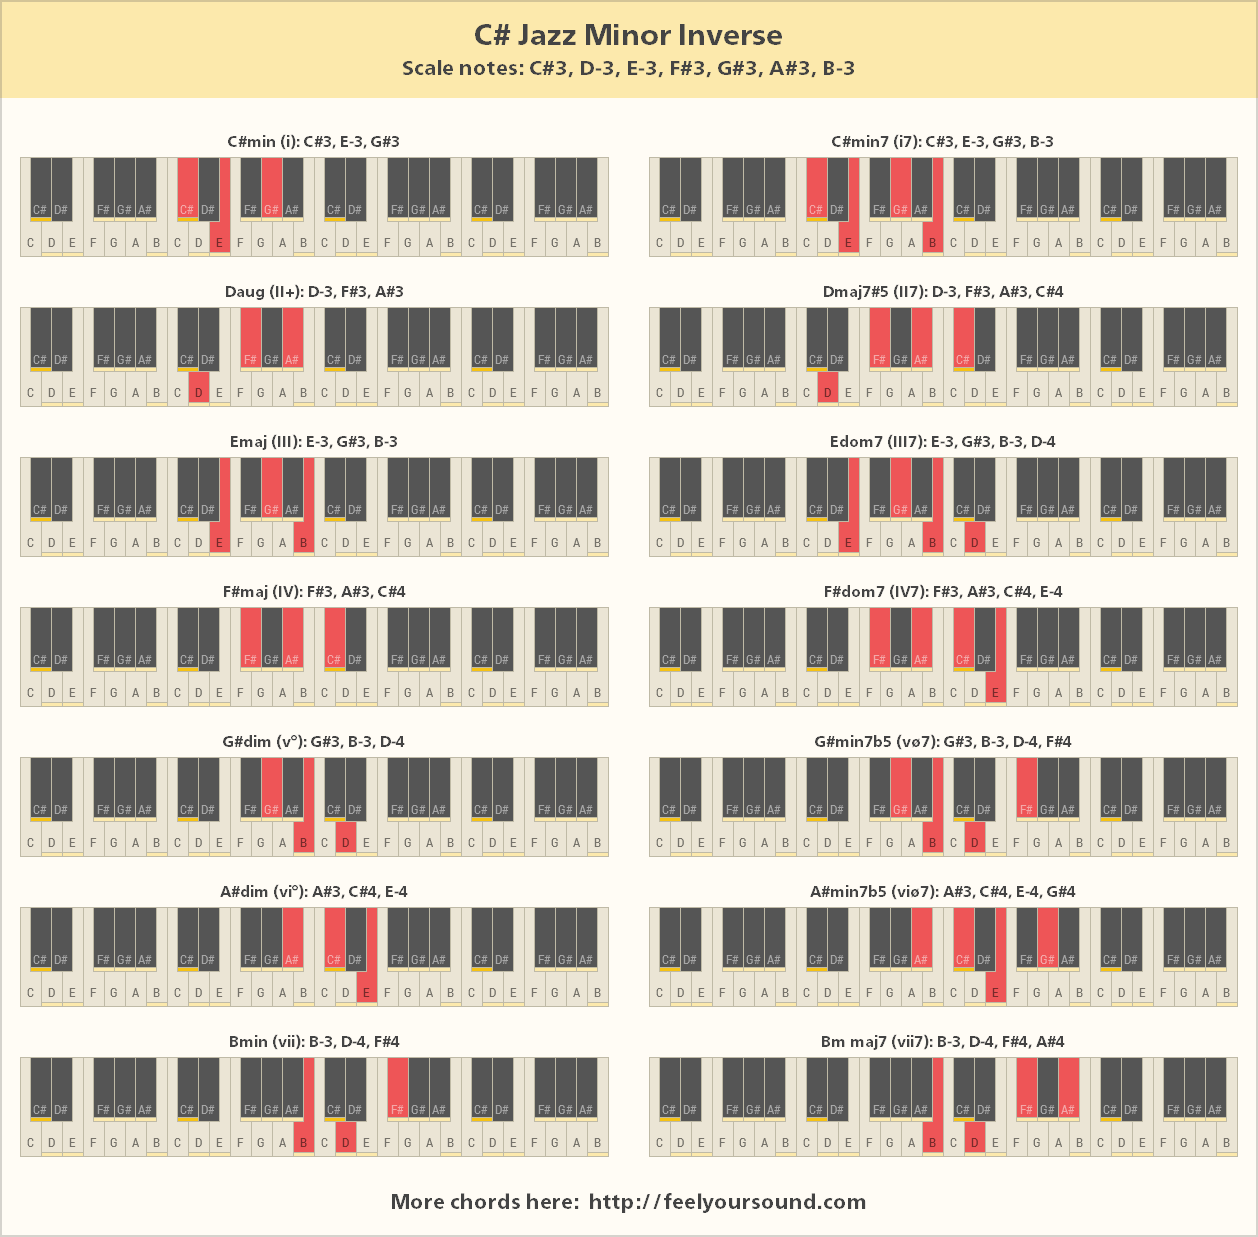 All important chords of C# Jazz Minor Inverse